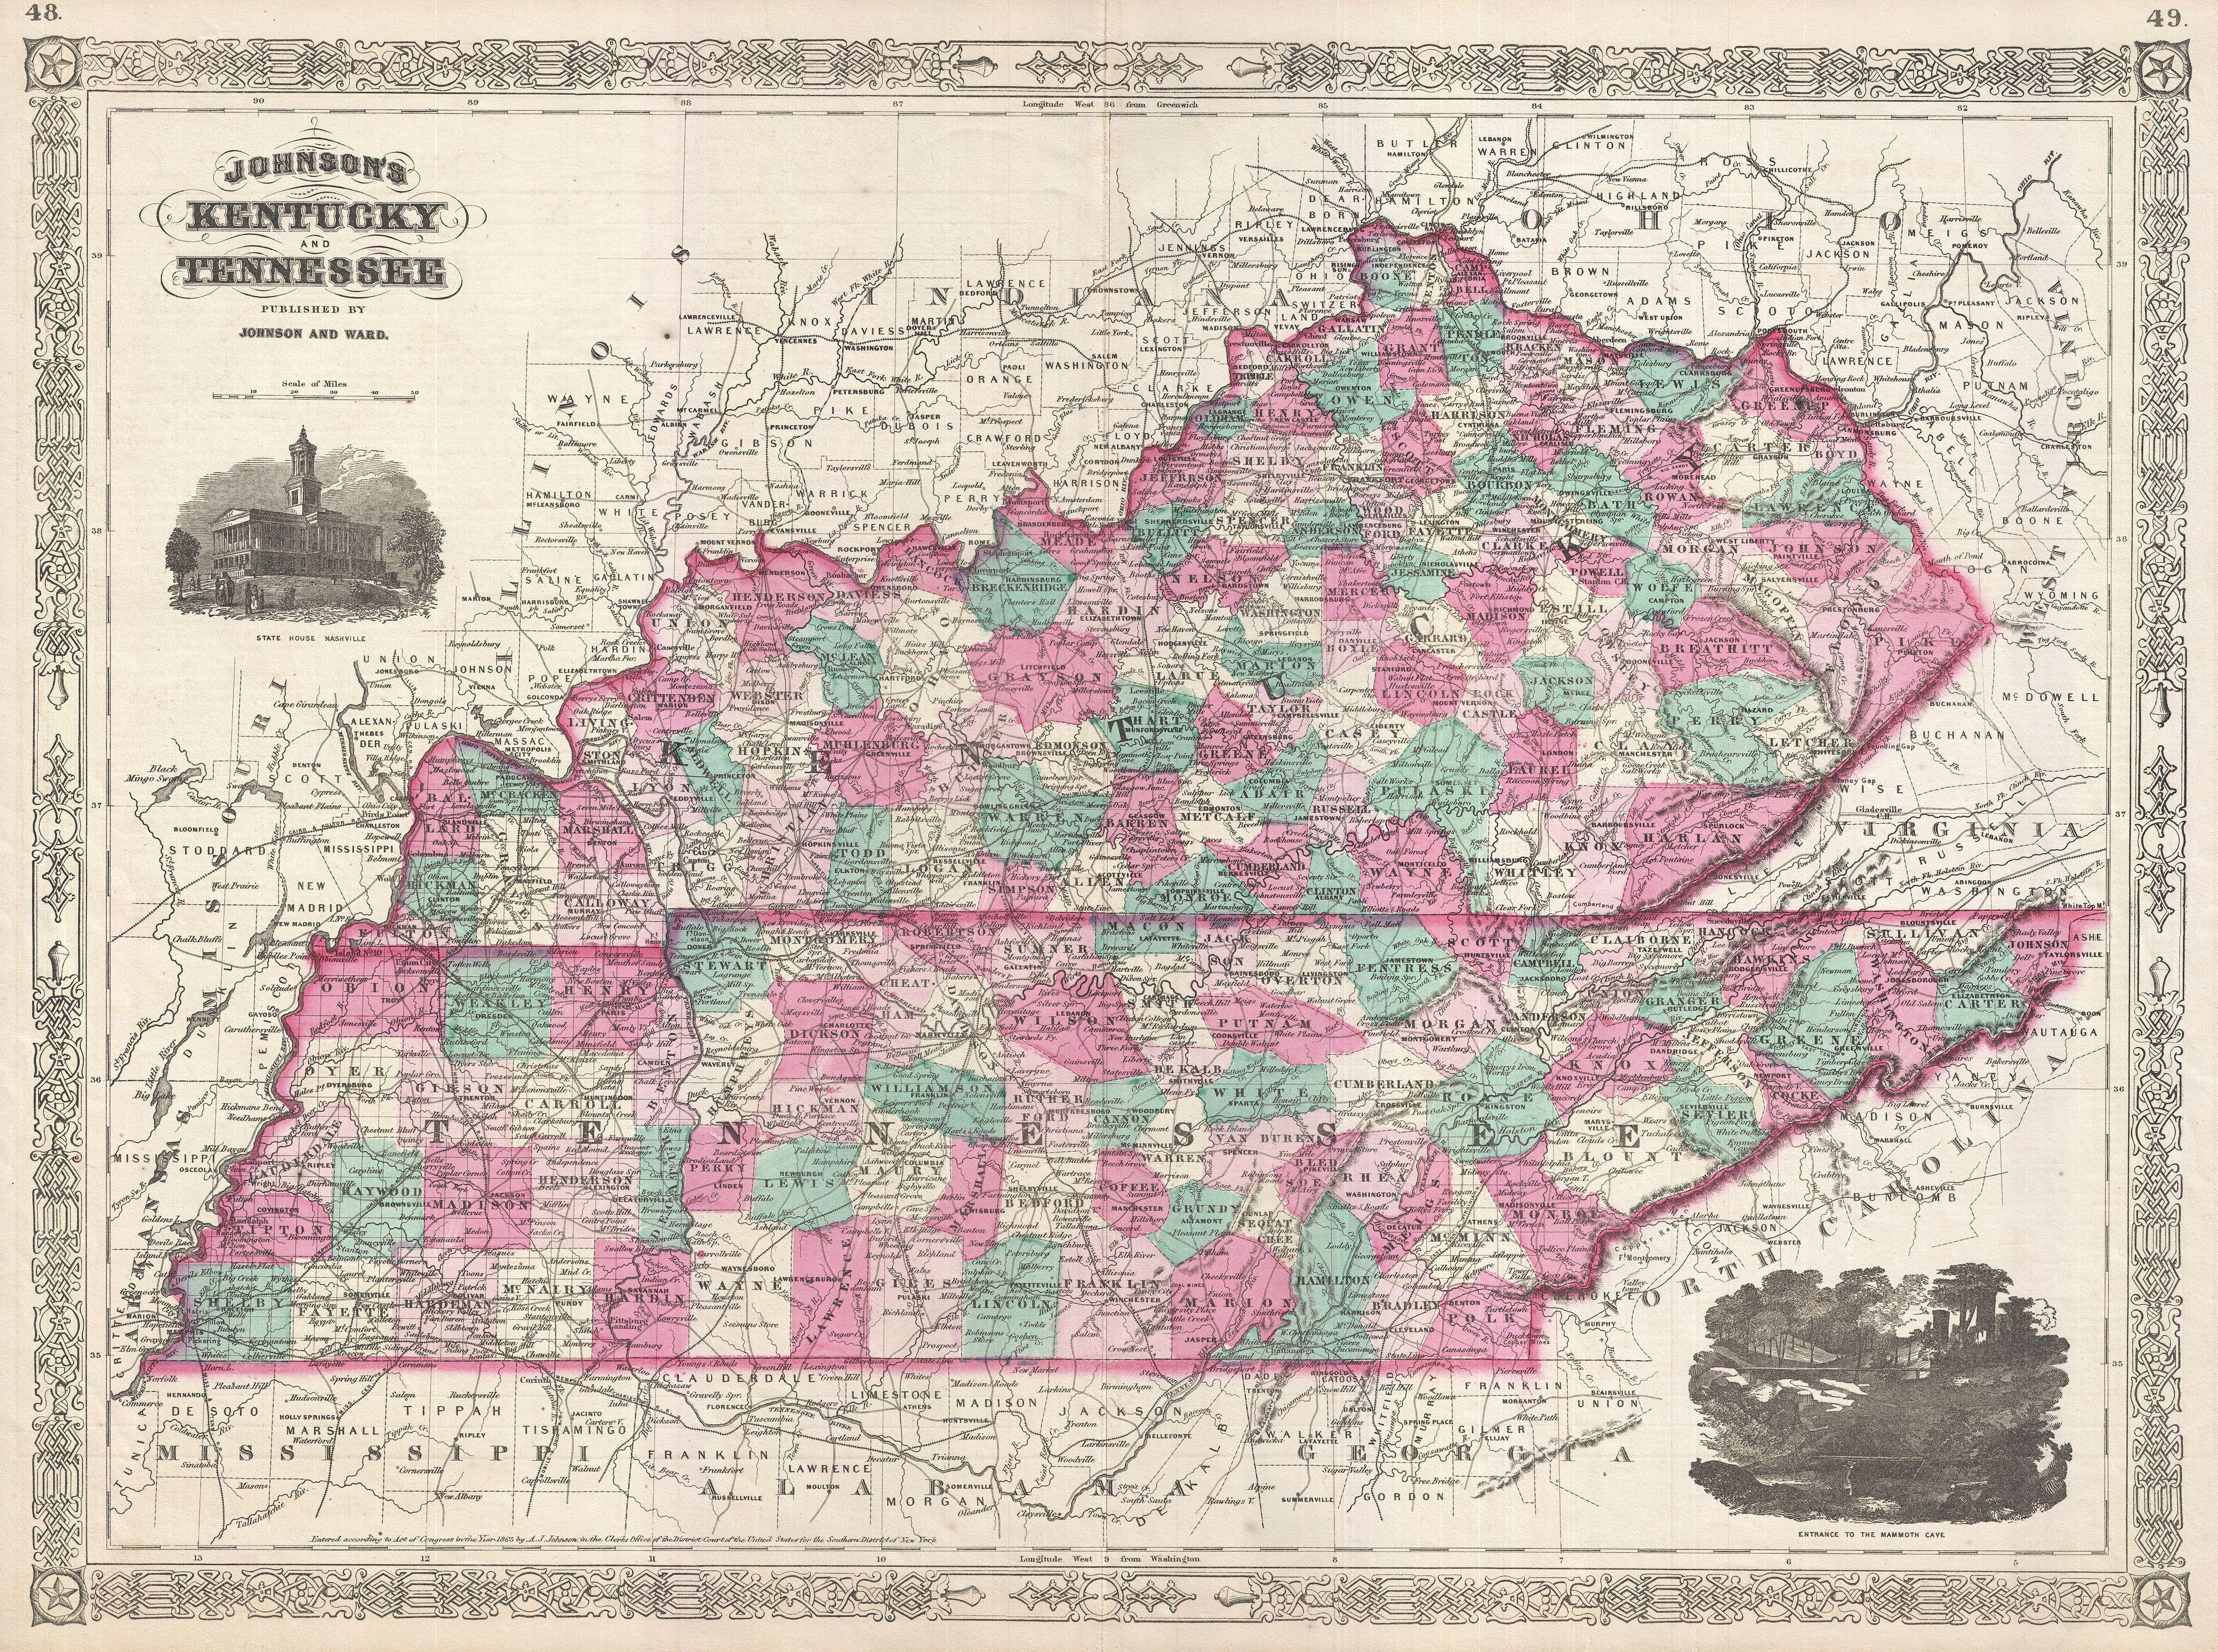 map tennessee and kentucky File 1866 Johnson Map Of Kentucky And Tennessee Geographicus map tennessee and kentucky